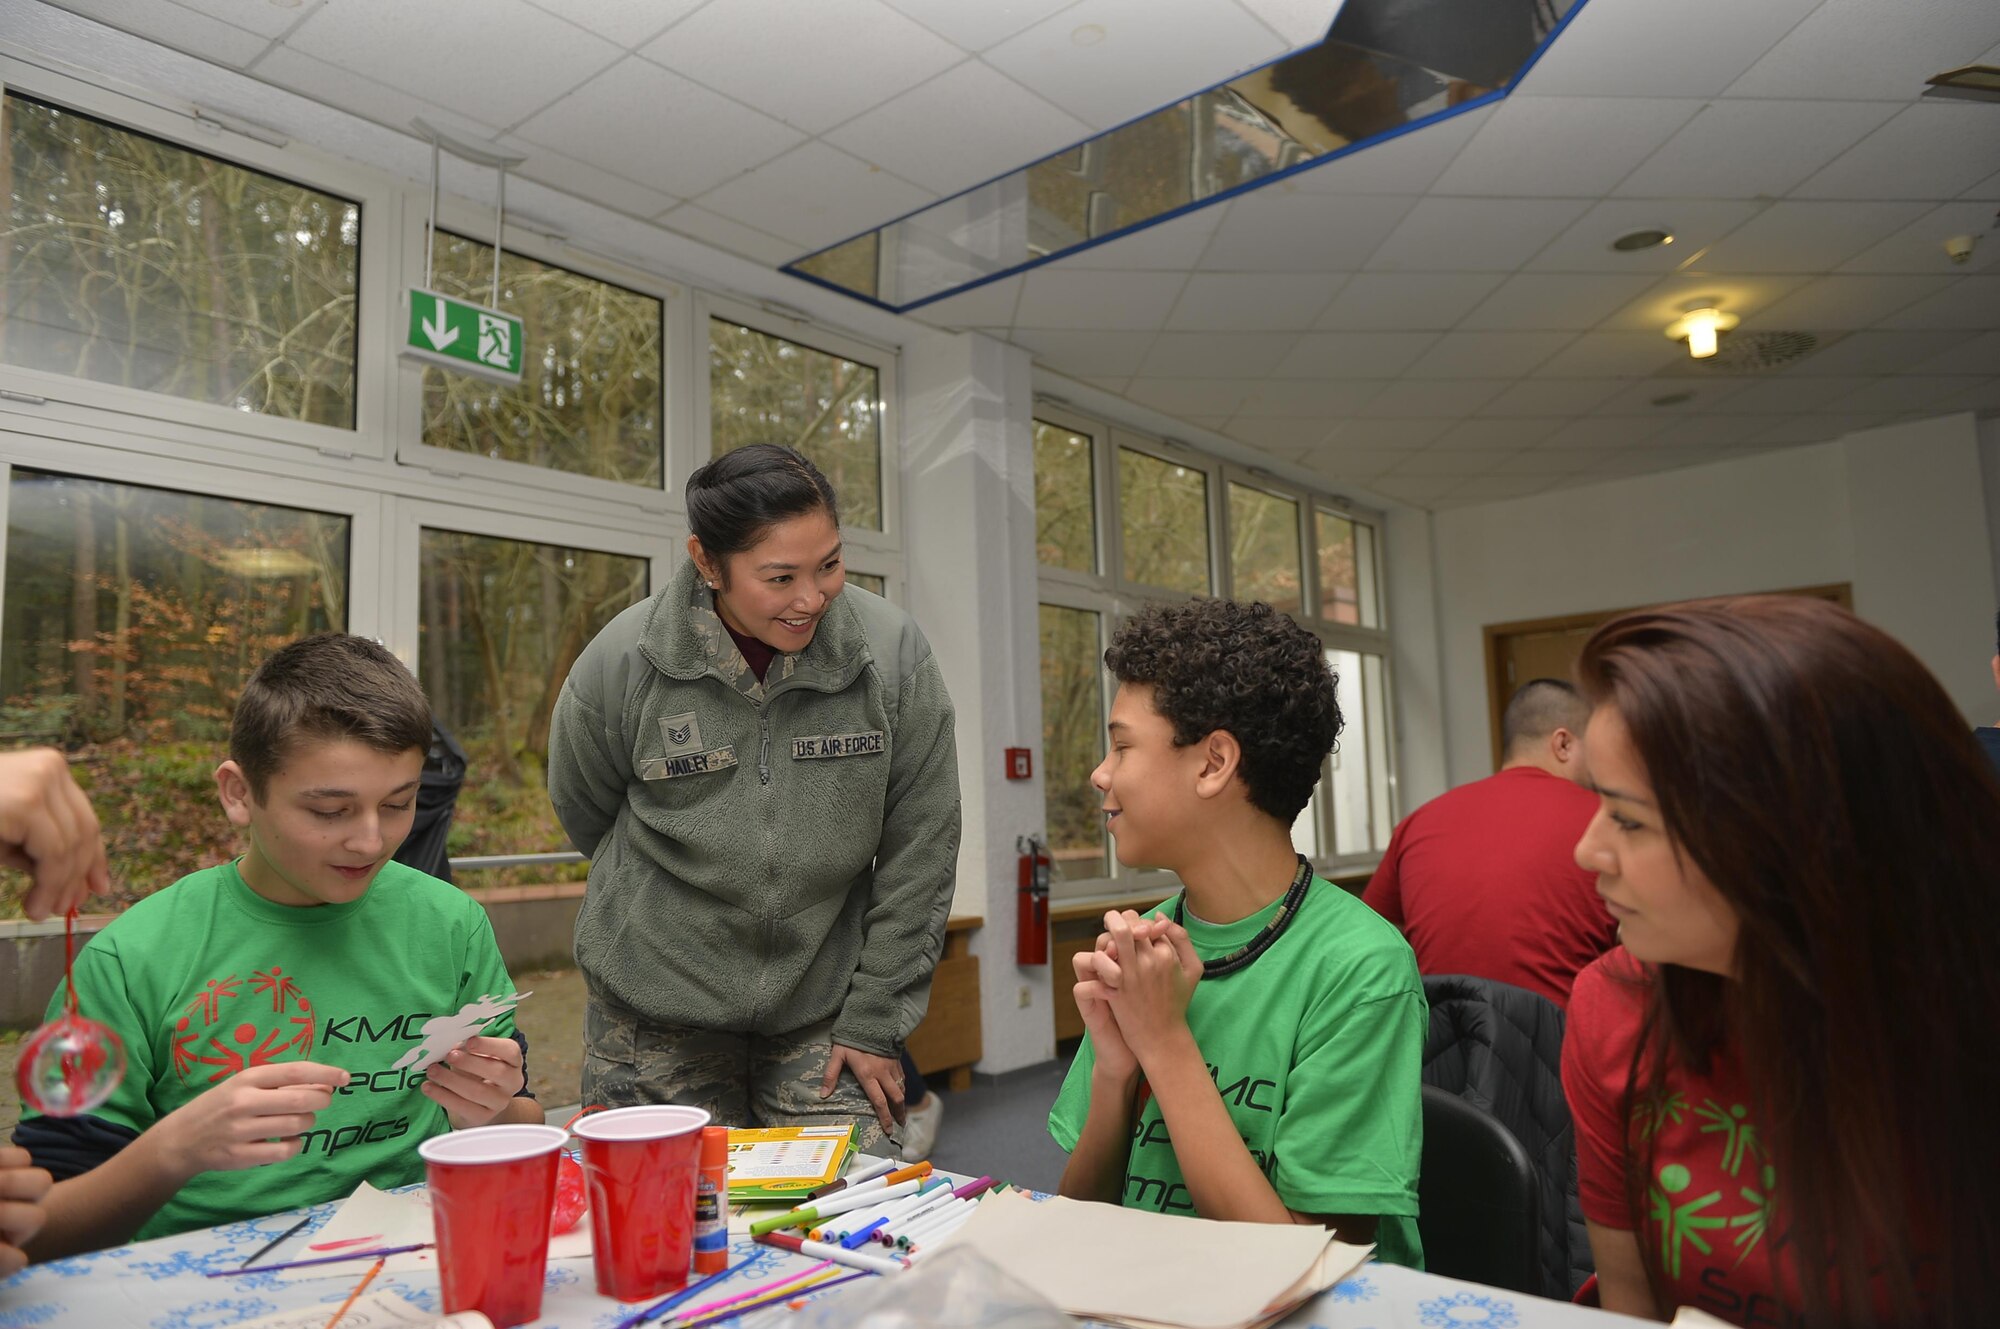 U.S. Air Force Kristina Hailey, 86th Dental Squadron non-commissioned officer in charge of the instrument processing center, talks to participants during the Kaiserslautern Military Community Winter Special Olympics on Vogelweh Military Complex, Germany, Dec. 1, 2017. The purpose of the Special Olympics events are to help build self-confidence and camaraderie in the children who participate. (U.S. Air Force photo by Airman 1st Class Joshua Magbanua)